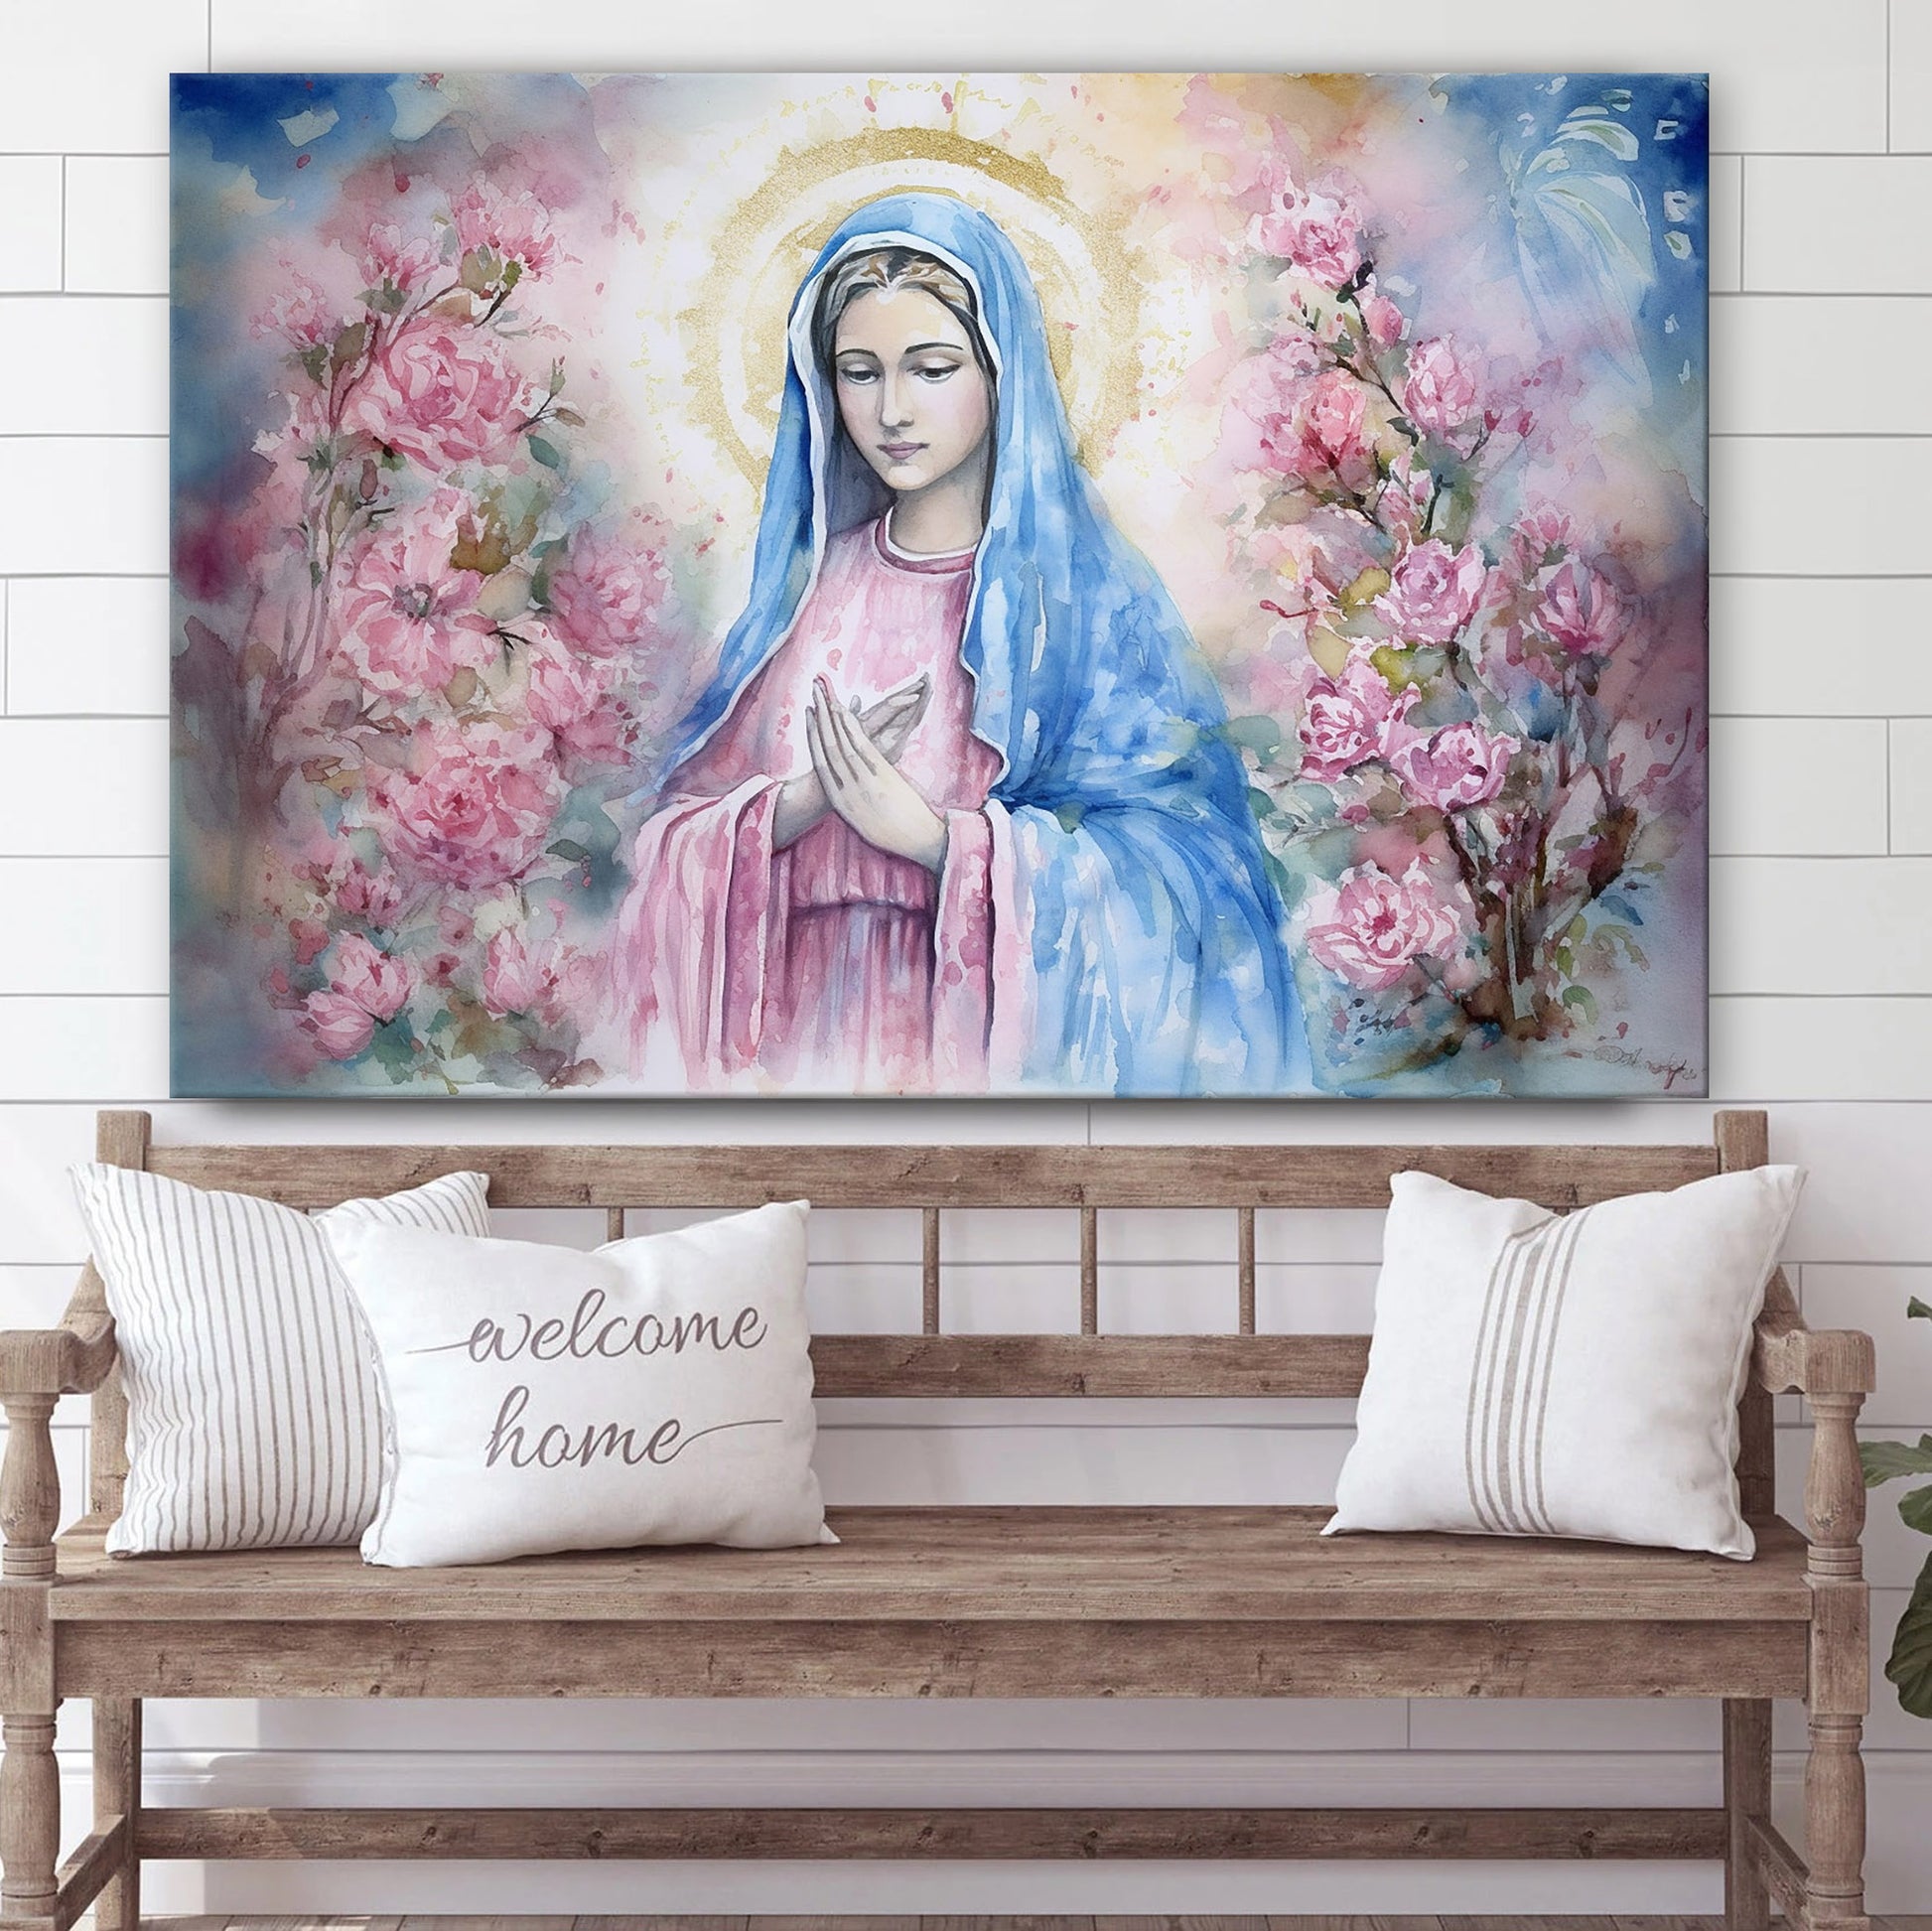 Painting Of The Lady In A Garden With Pink Flowers - Jesus Canvas Pictures - Christian Wall Art